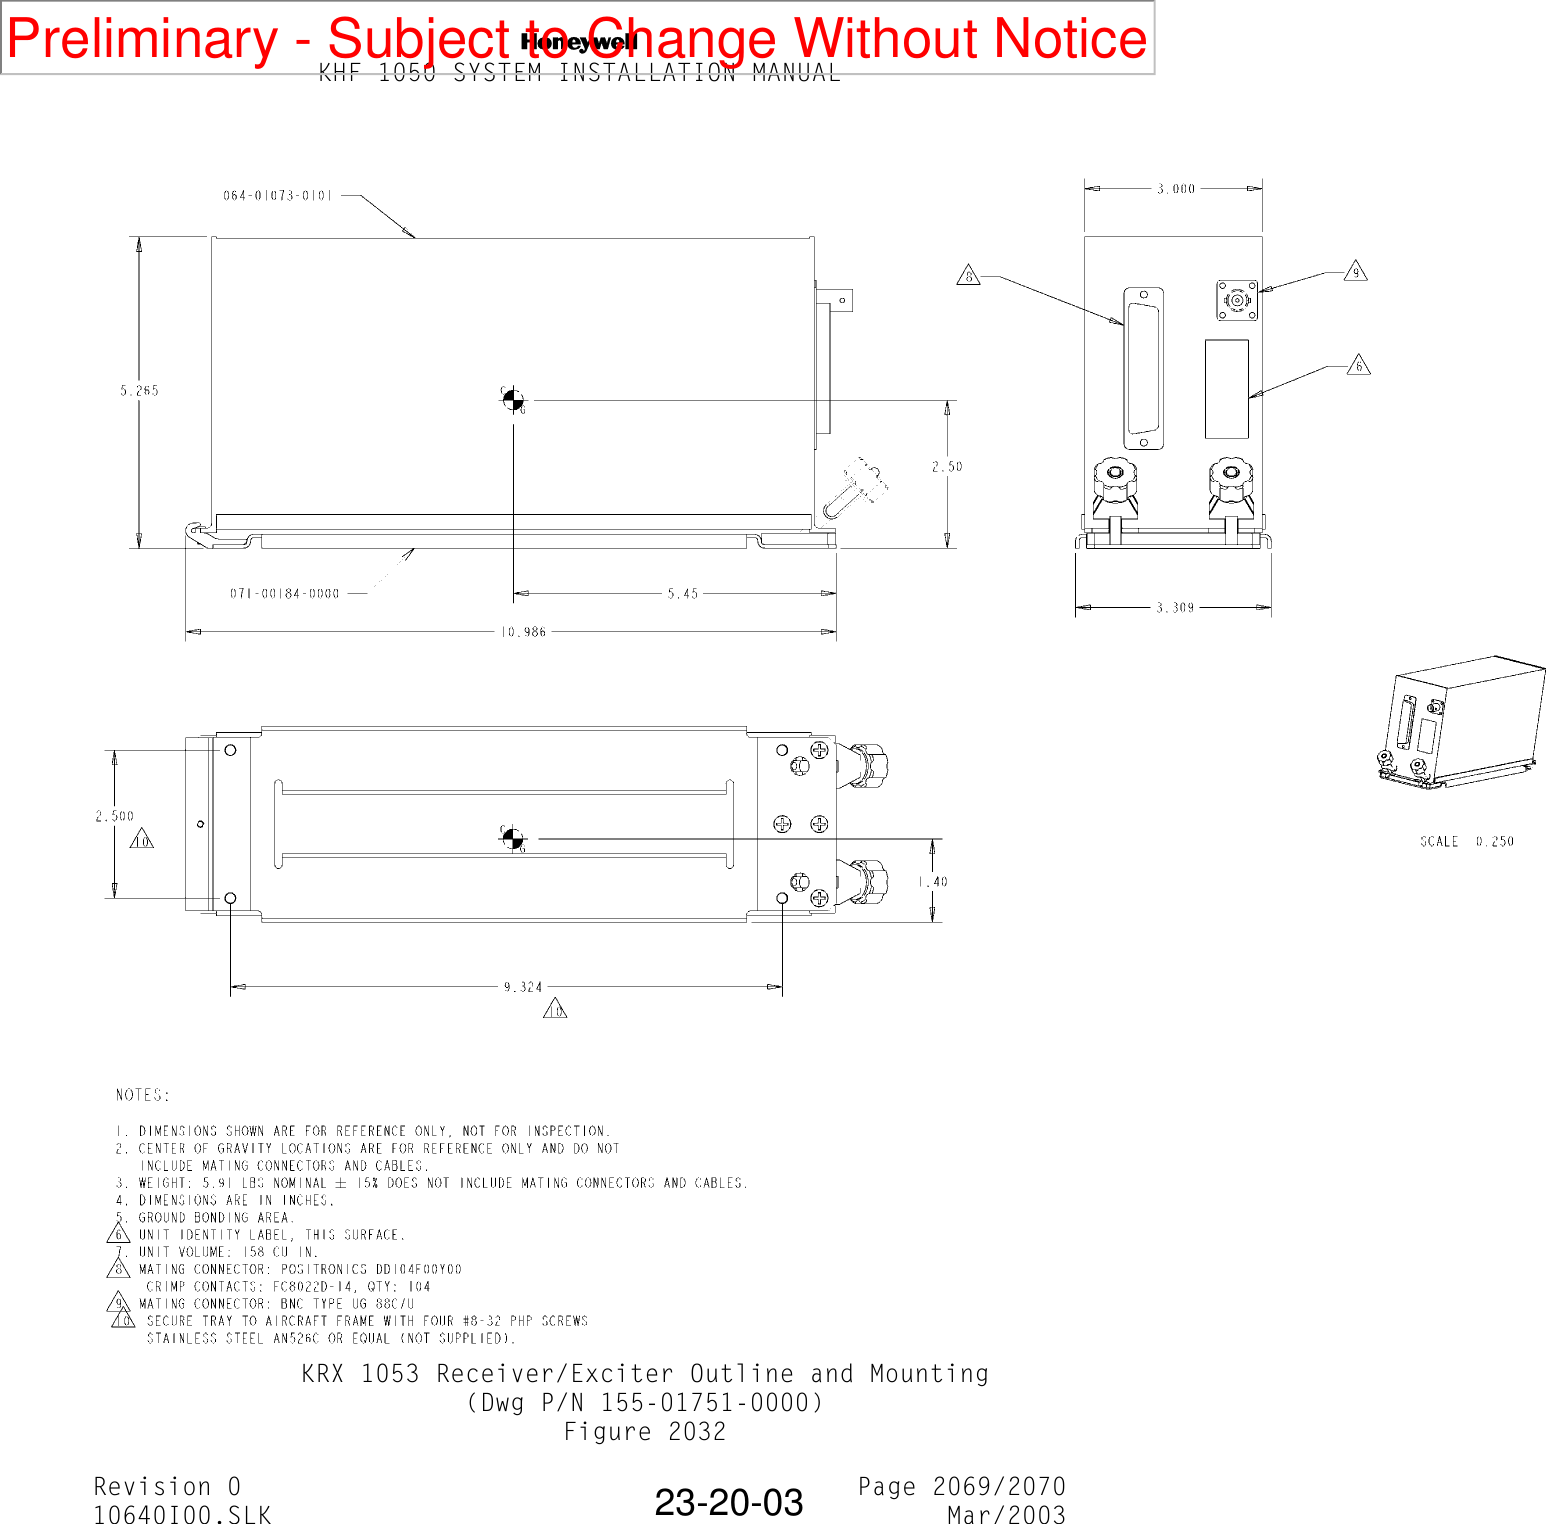 NKHF 1050 SYSTEM INSTALLATION MANUALRevision 0 Page 2069/207010640I00.SLK Mar/200323-20-03KRX 1053 Receiver/Exciter Outline and Mounting(Dwg P/N 155-01751-0000)Figure 2032Preliminary - Subject to Change Without Notice